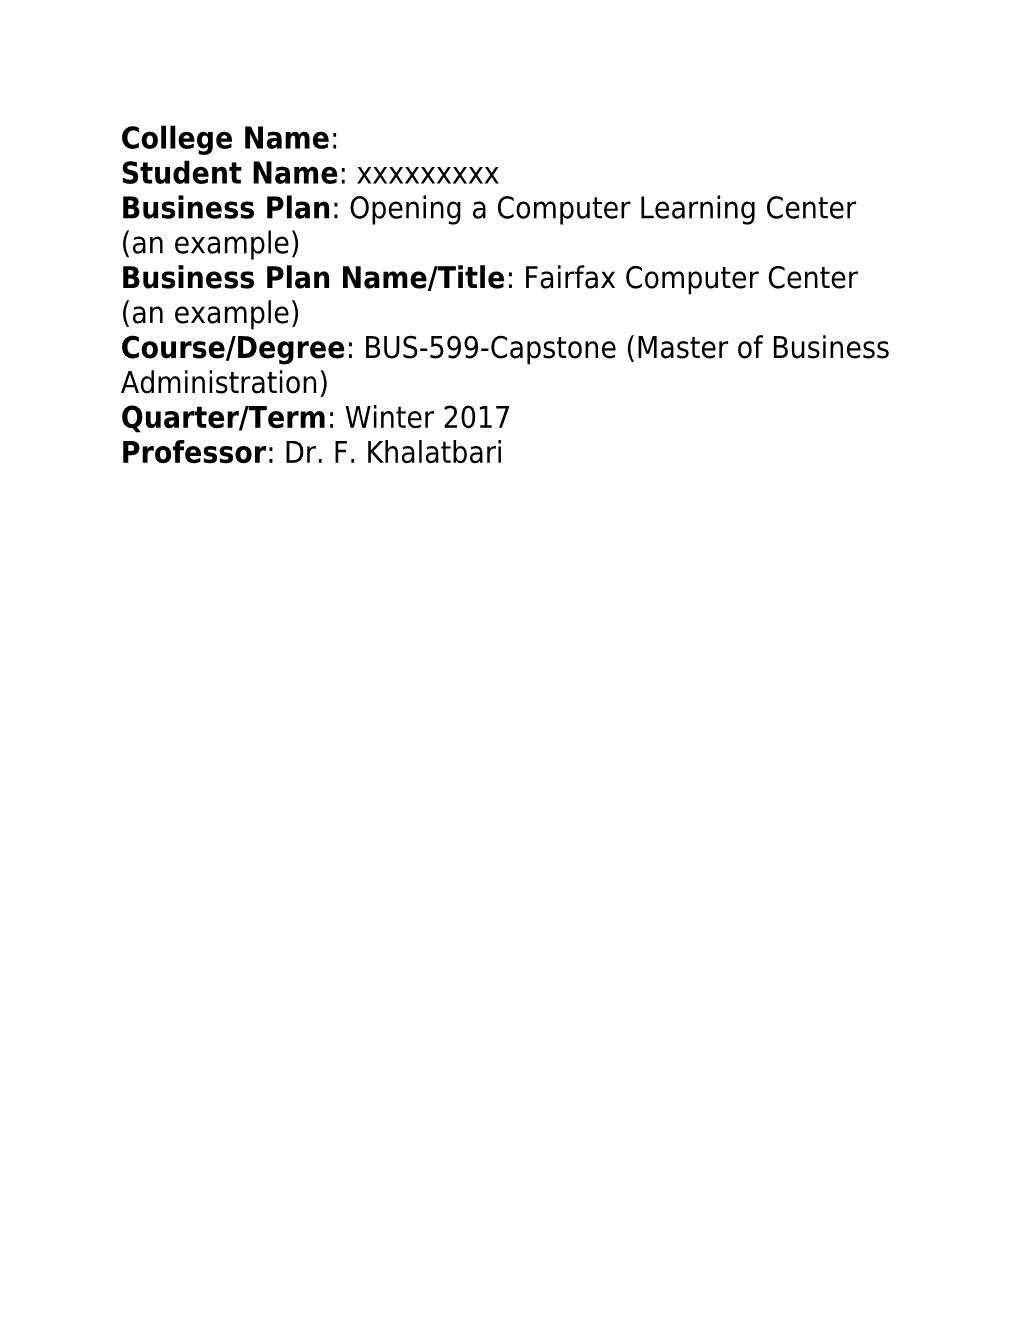 Business Plan: Opening a Computer Learning Center (An Example)